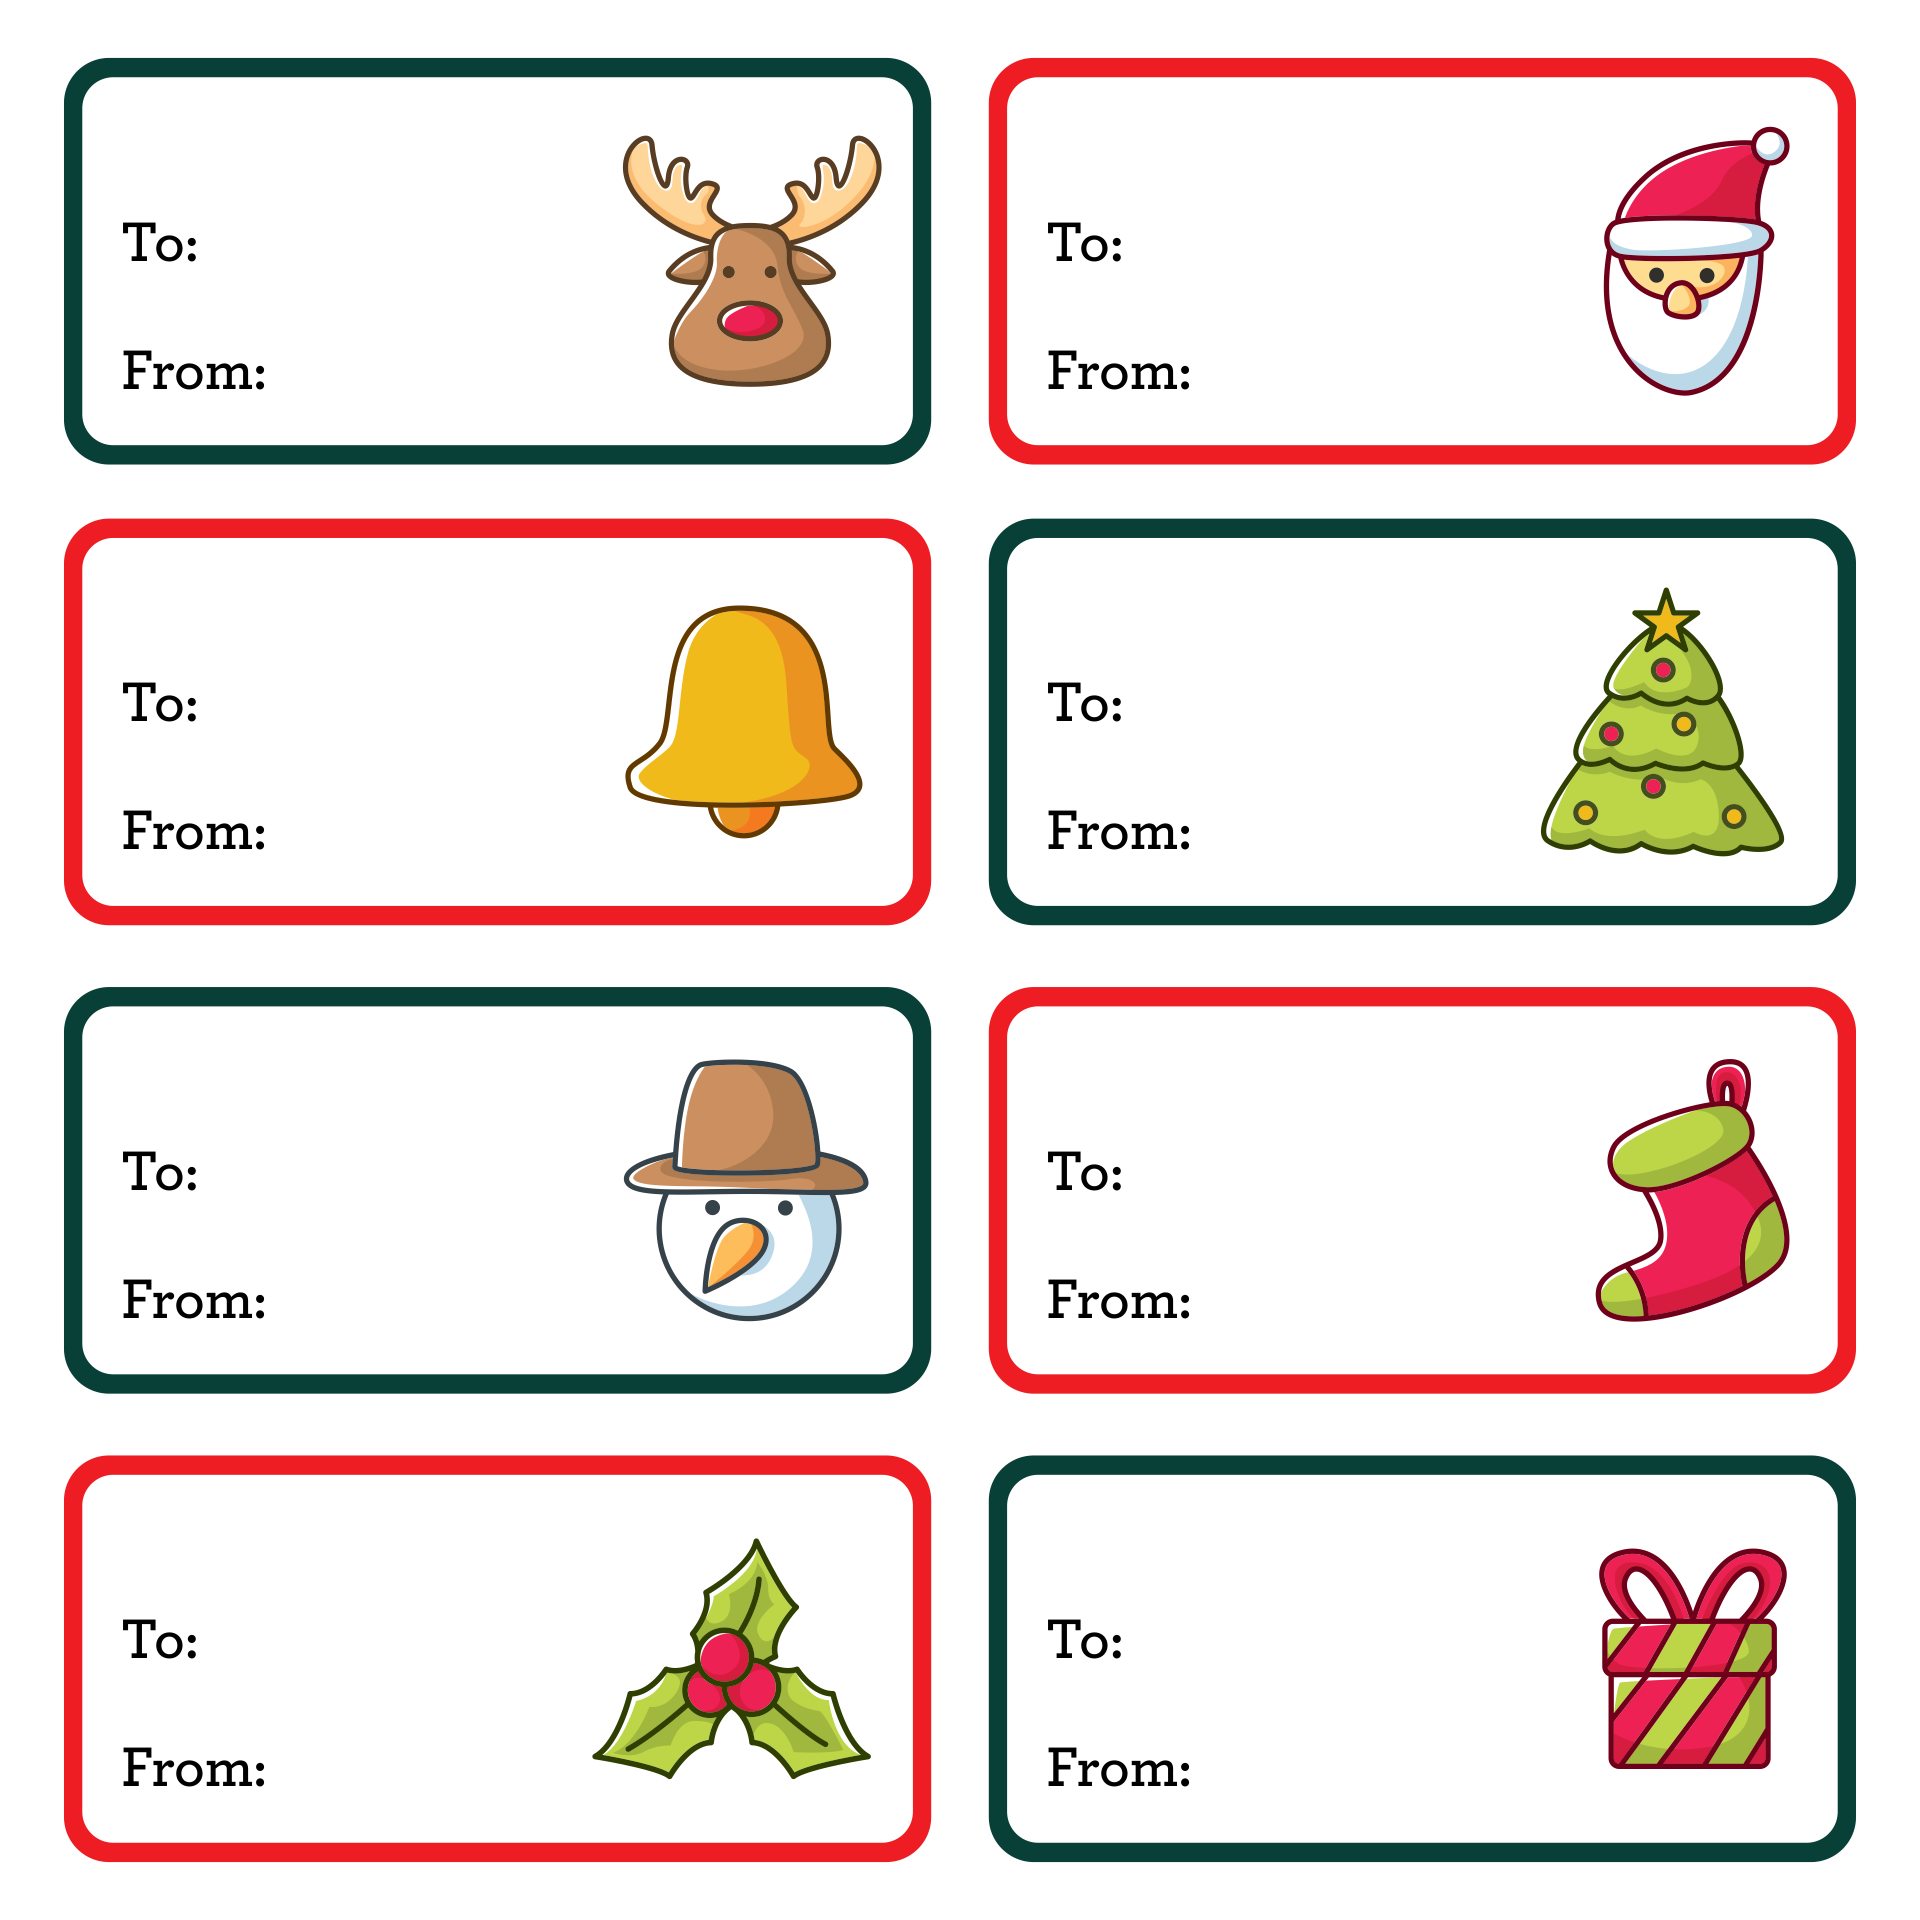 printable-holiday-labels